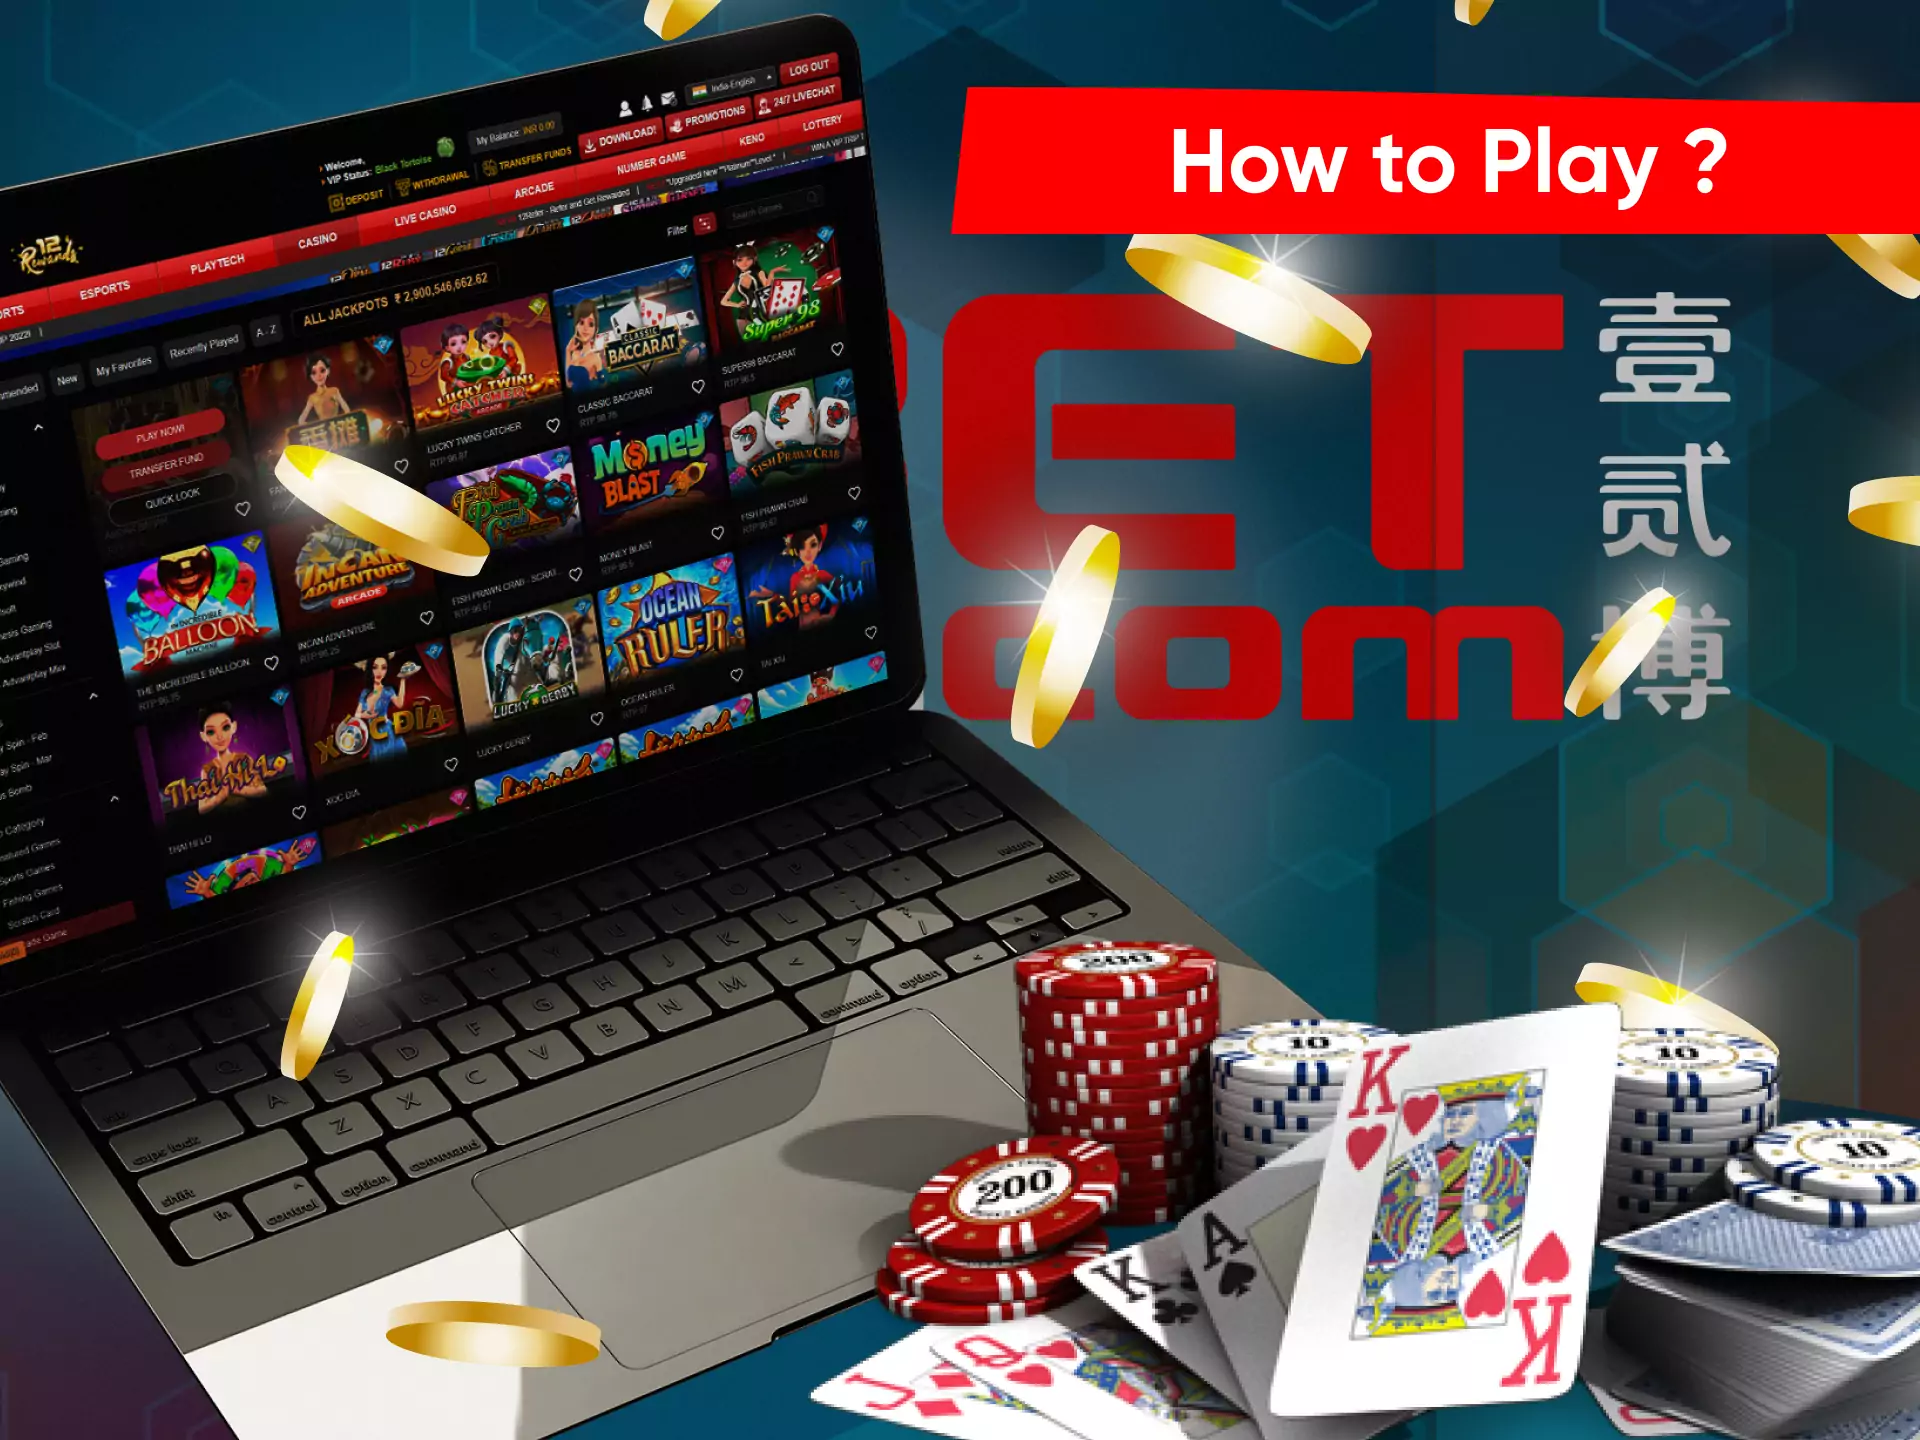 Follow the instructions, to start playing on 12bet.